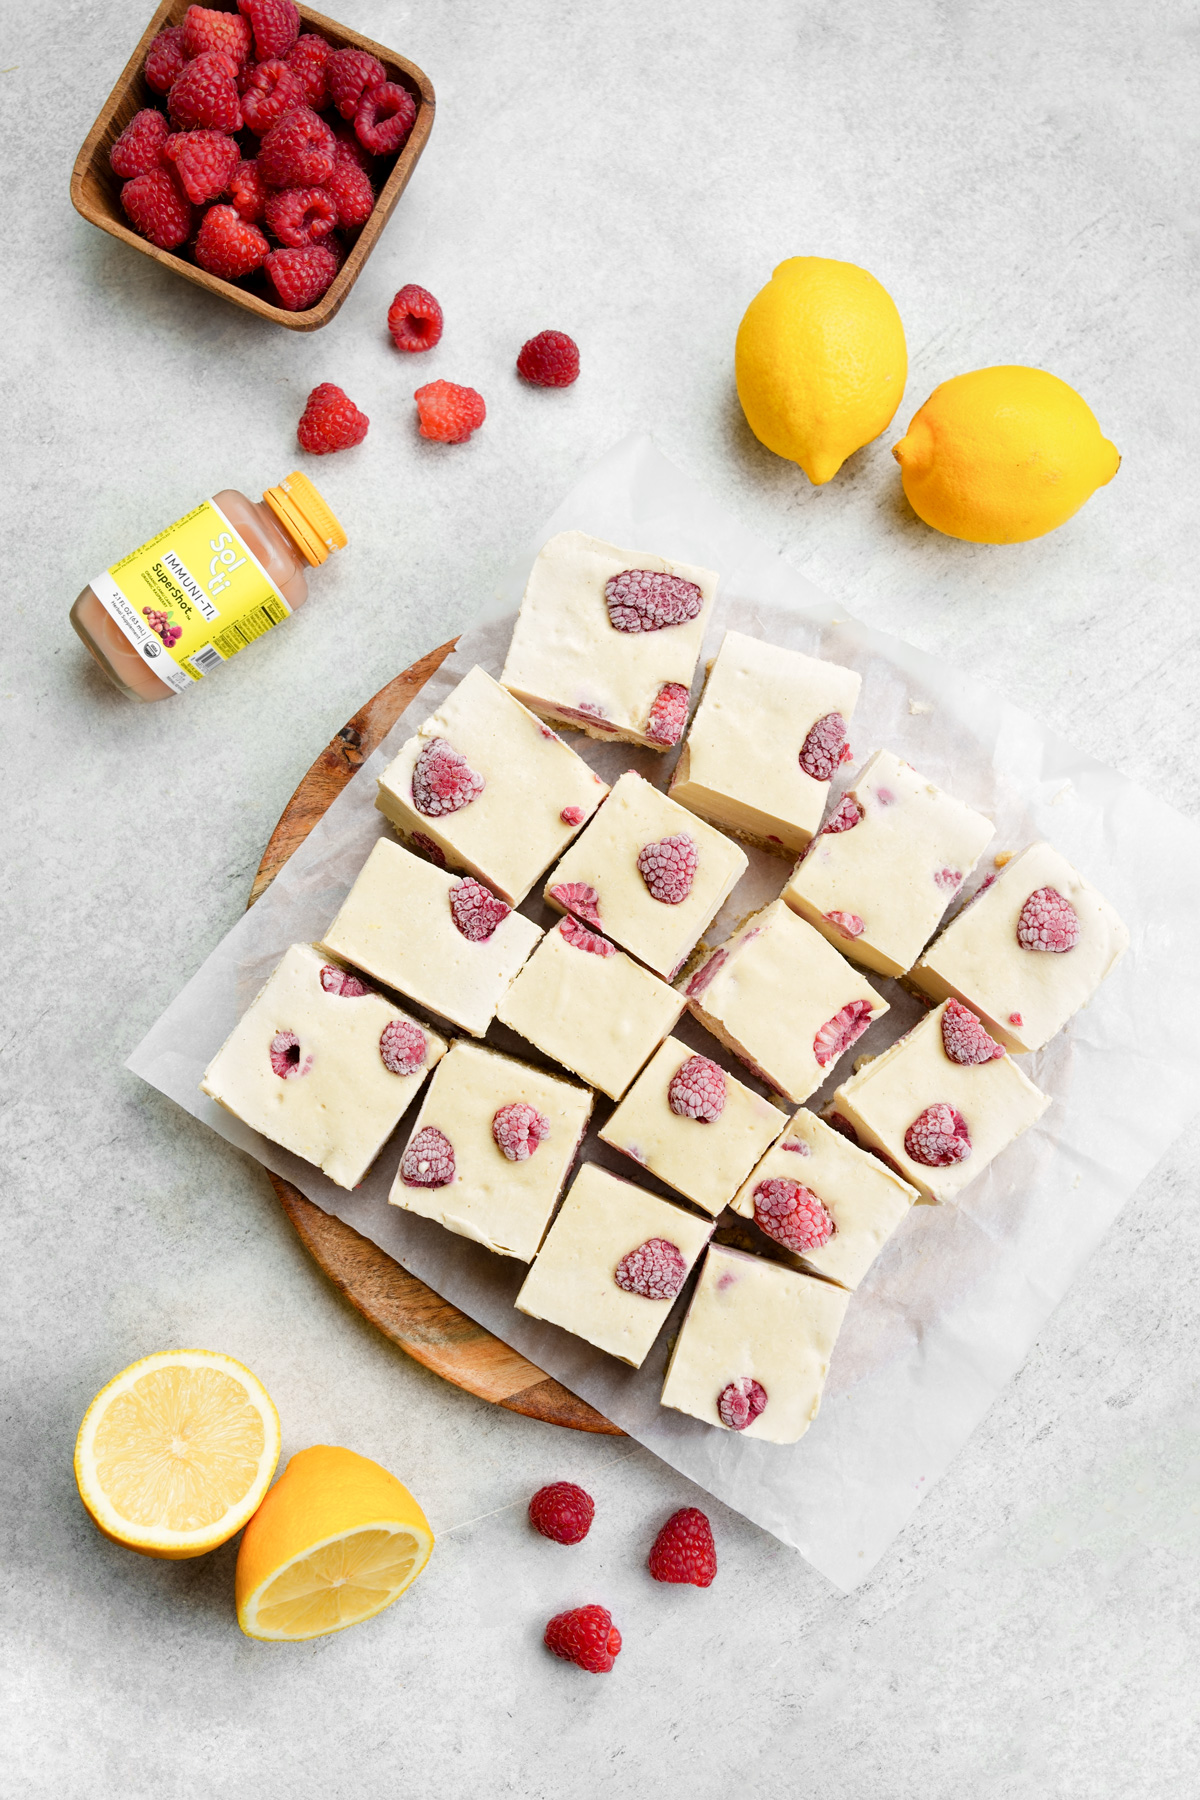 the raspberry lemon bars on a plate cut up with the sol-ti immuni-ti bottle next to them